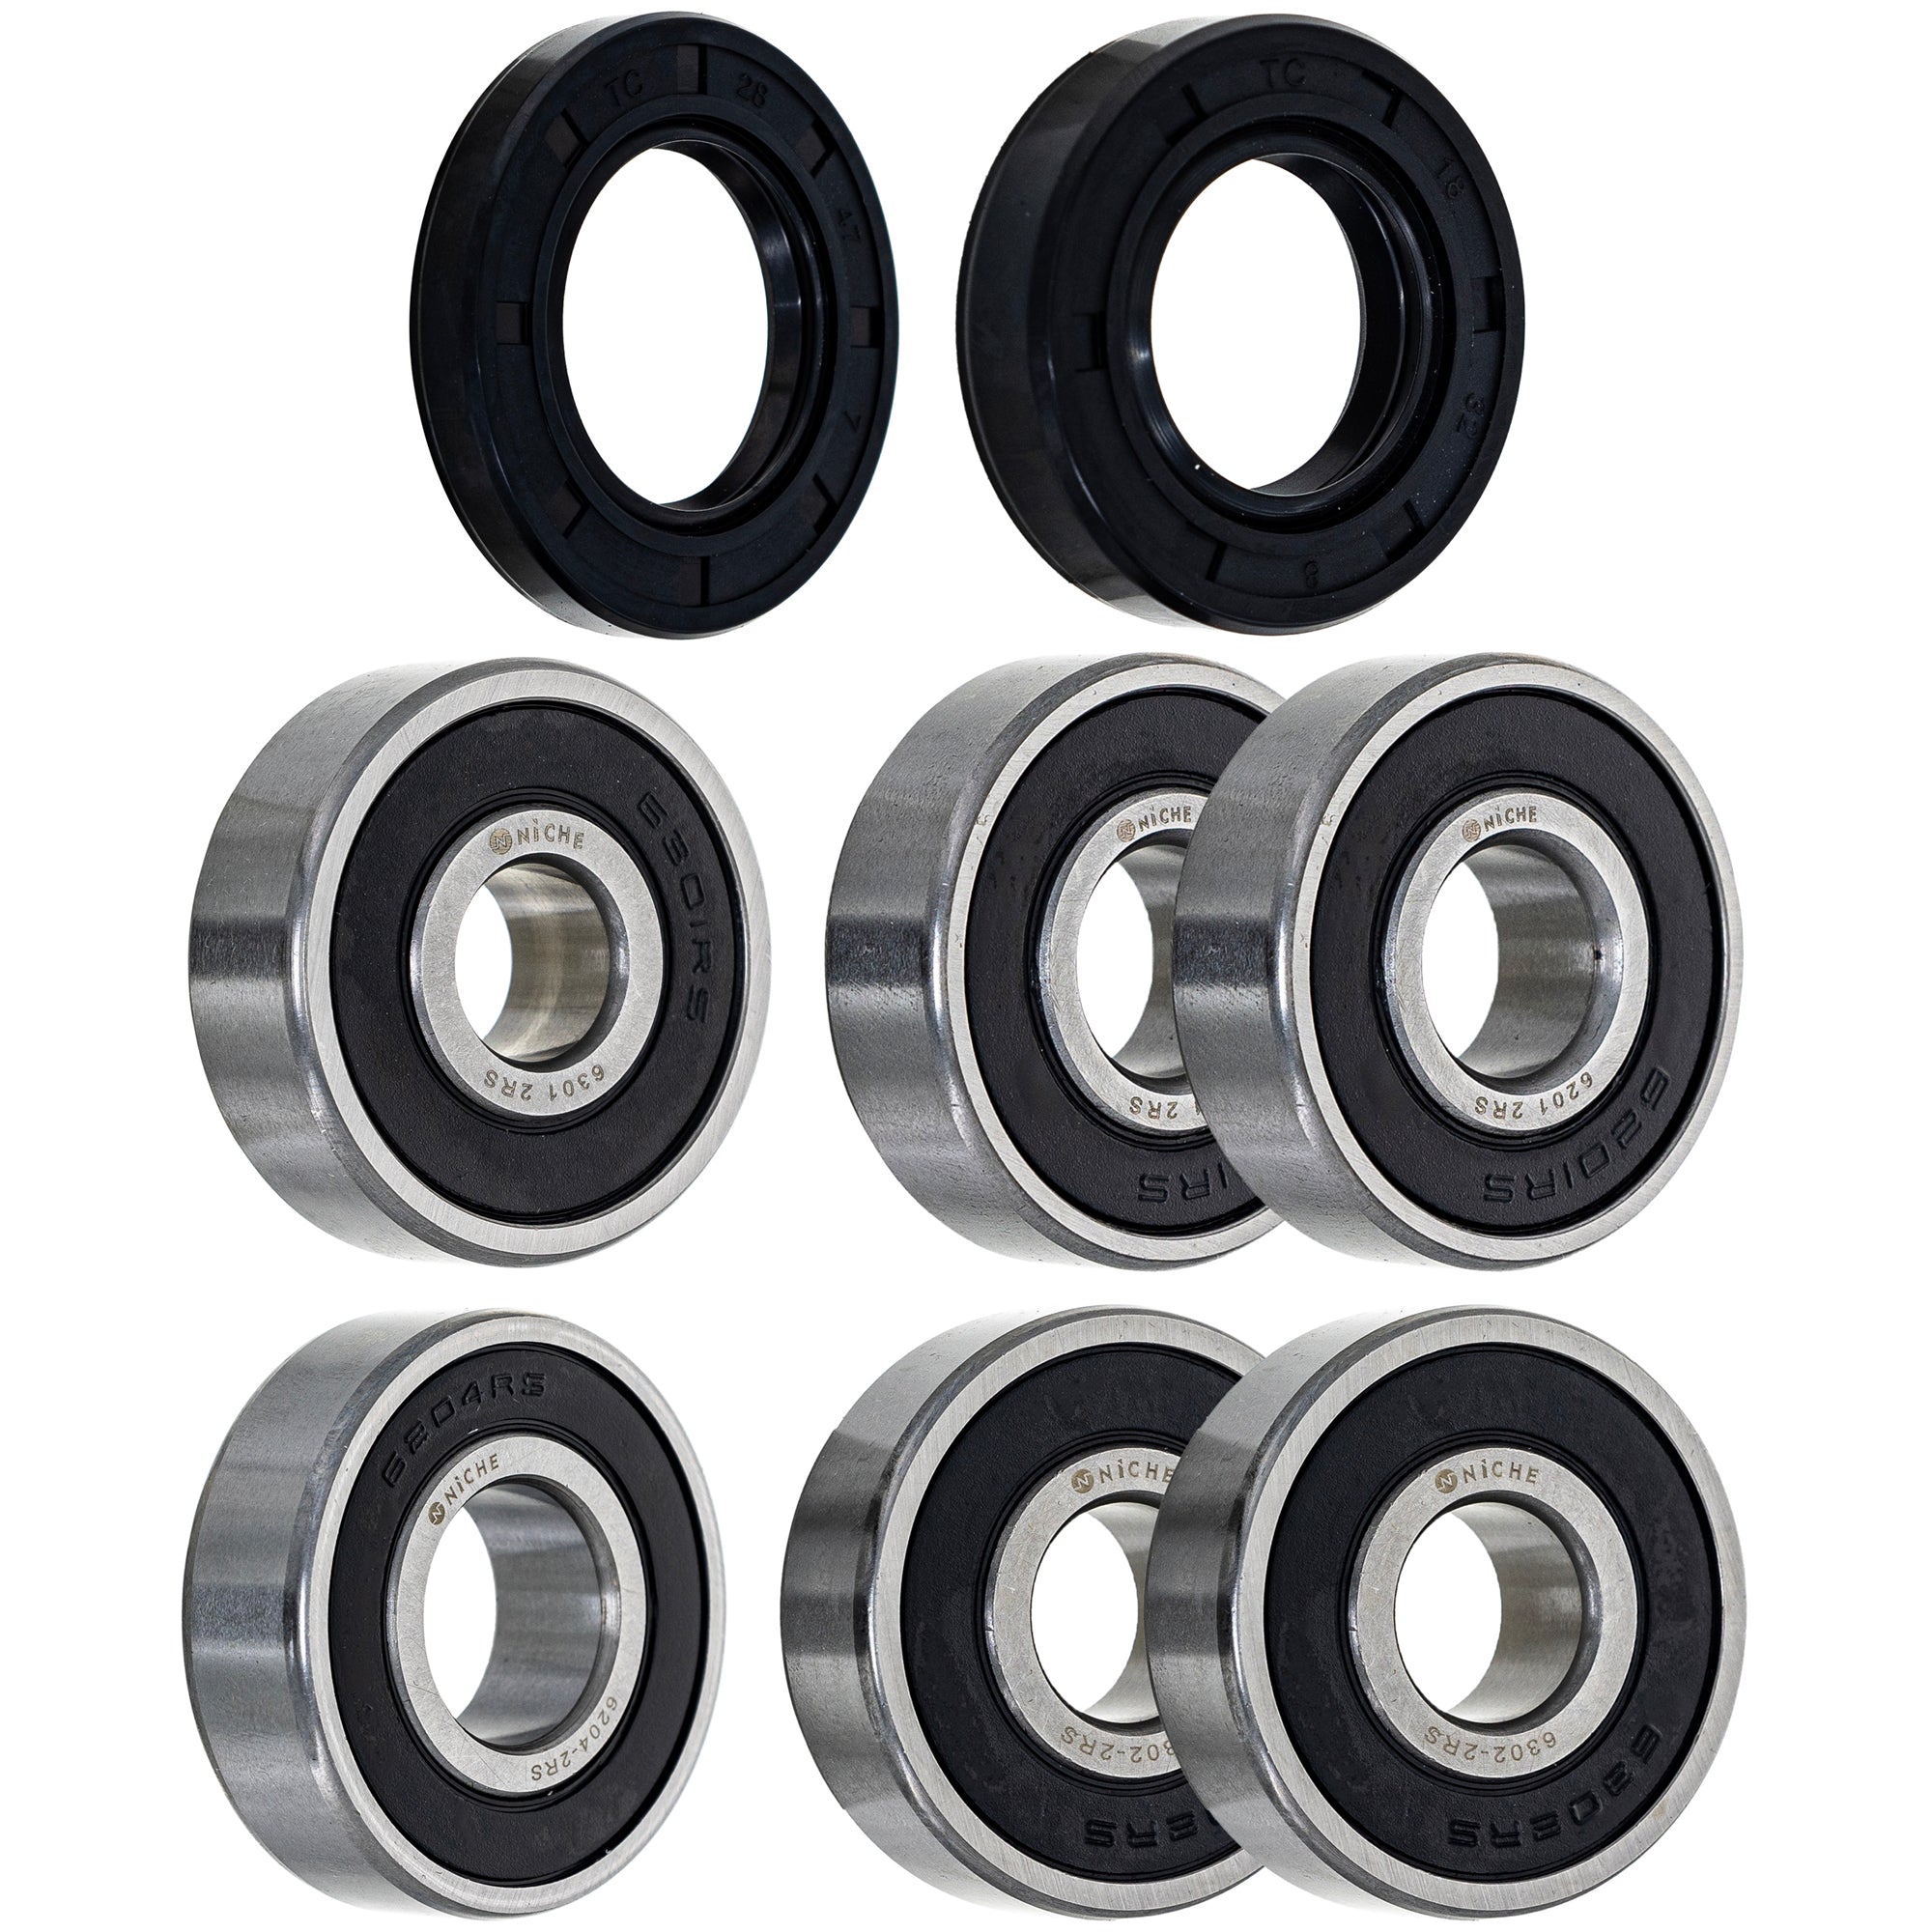 Wheel Bearing Seal Kit for zOTHER Ref No SP250 DR250 NICHE MK1008682